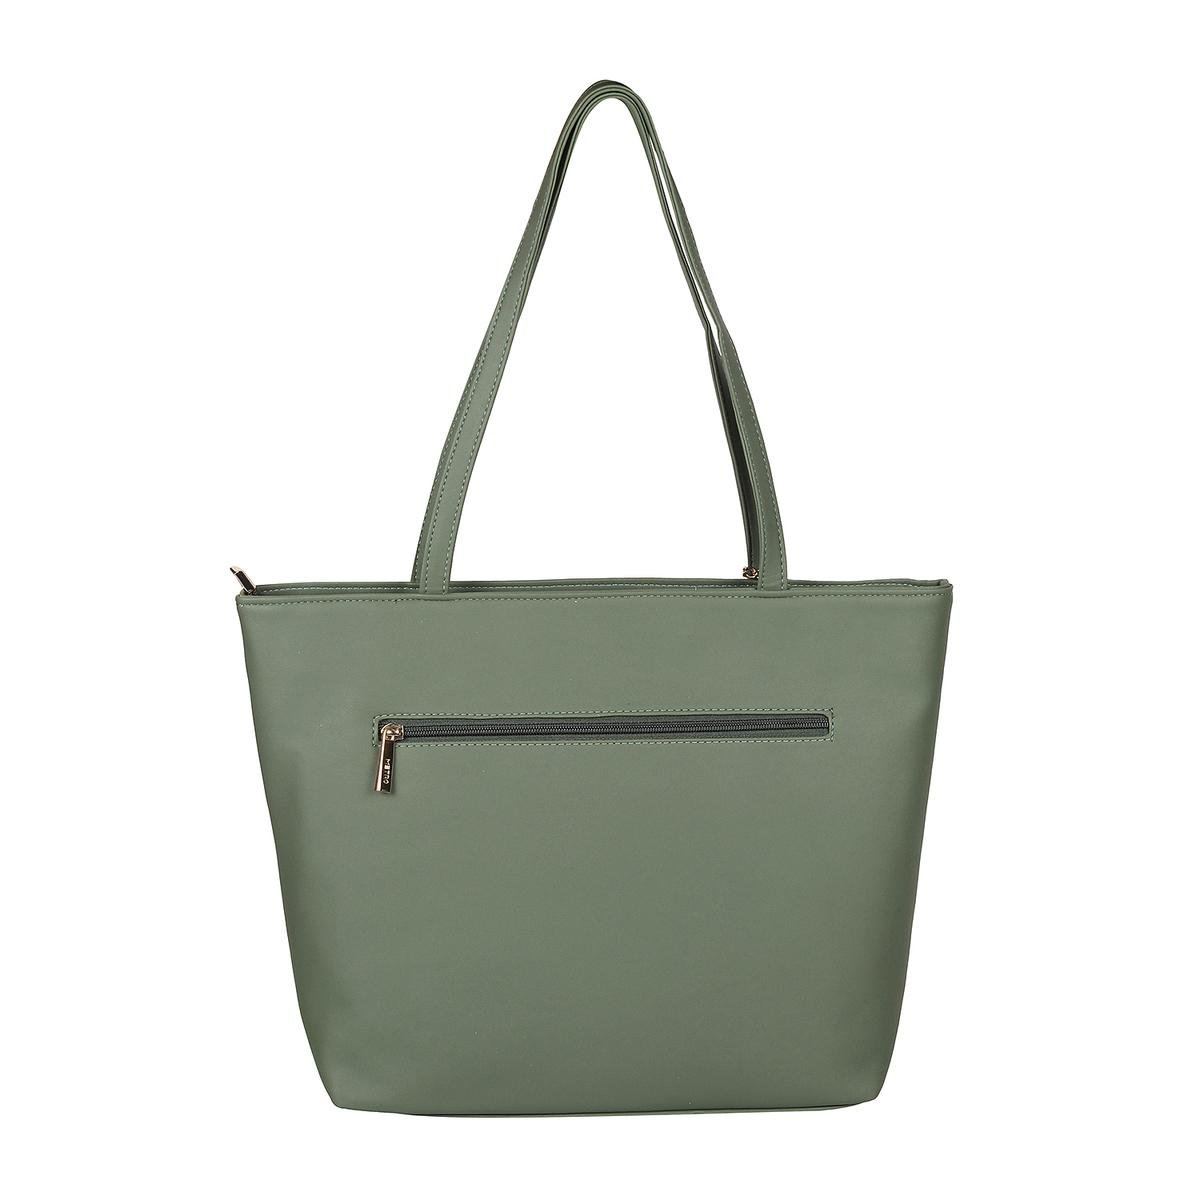 Green Tote Bags - Buy Green Tote Bags online in India